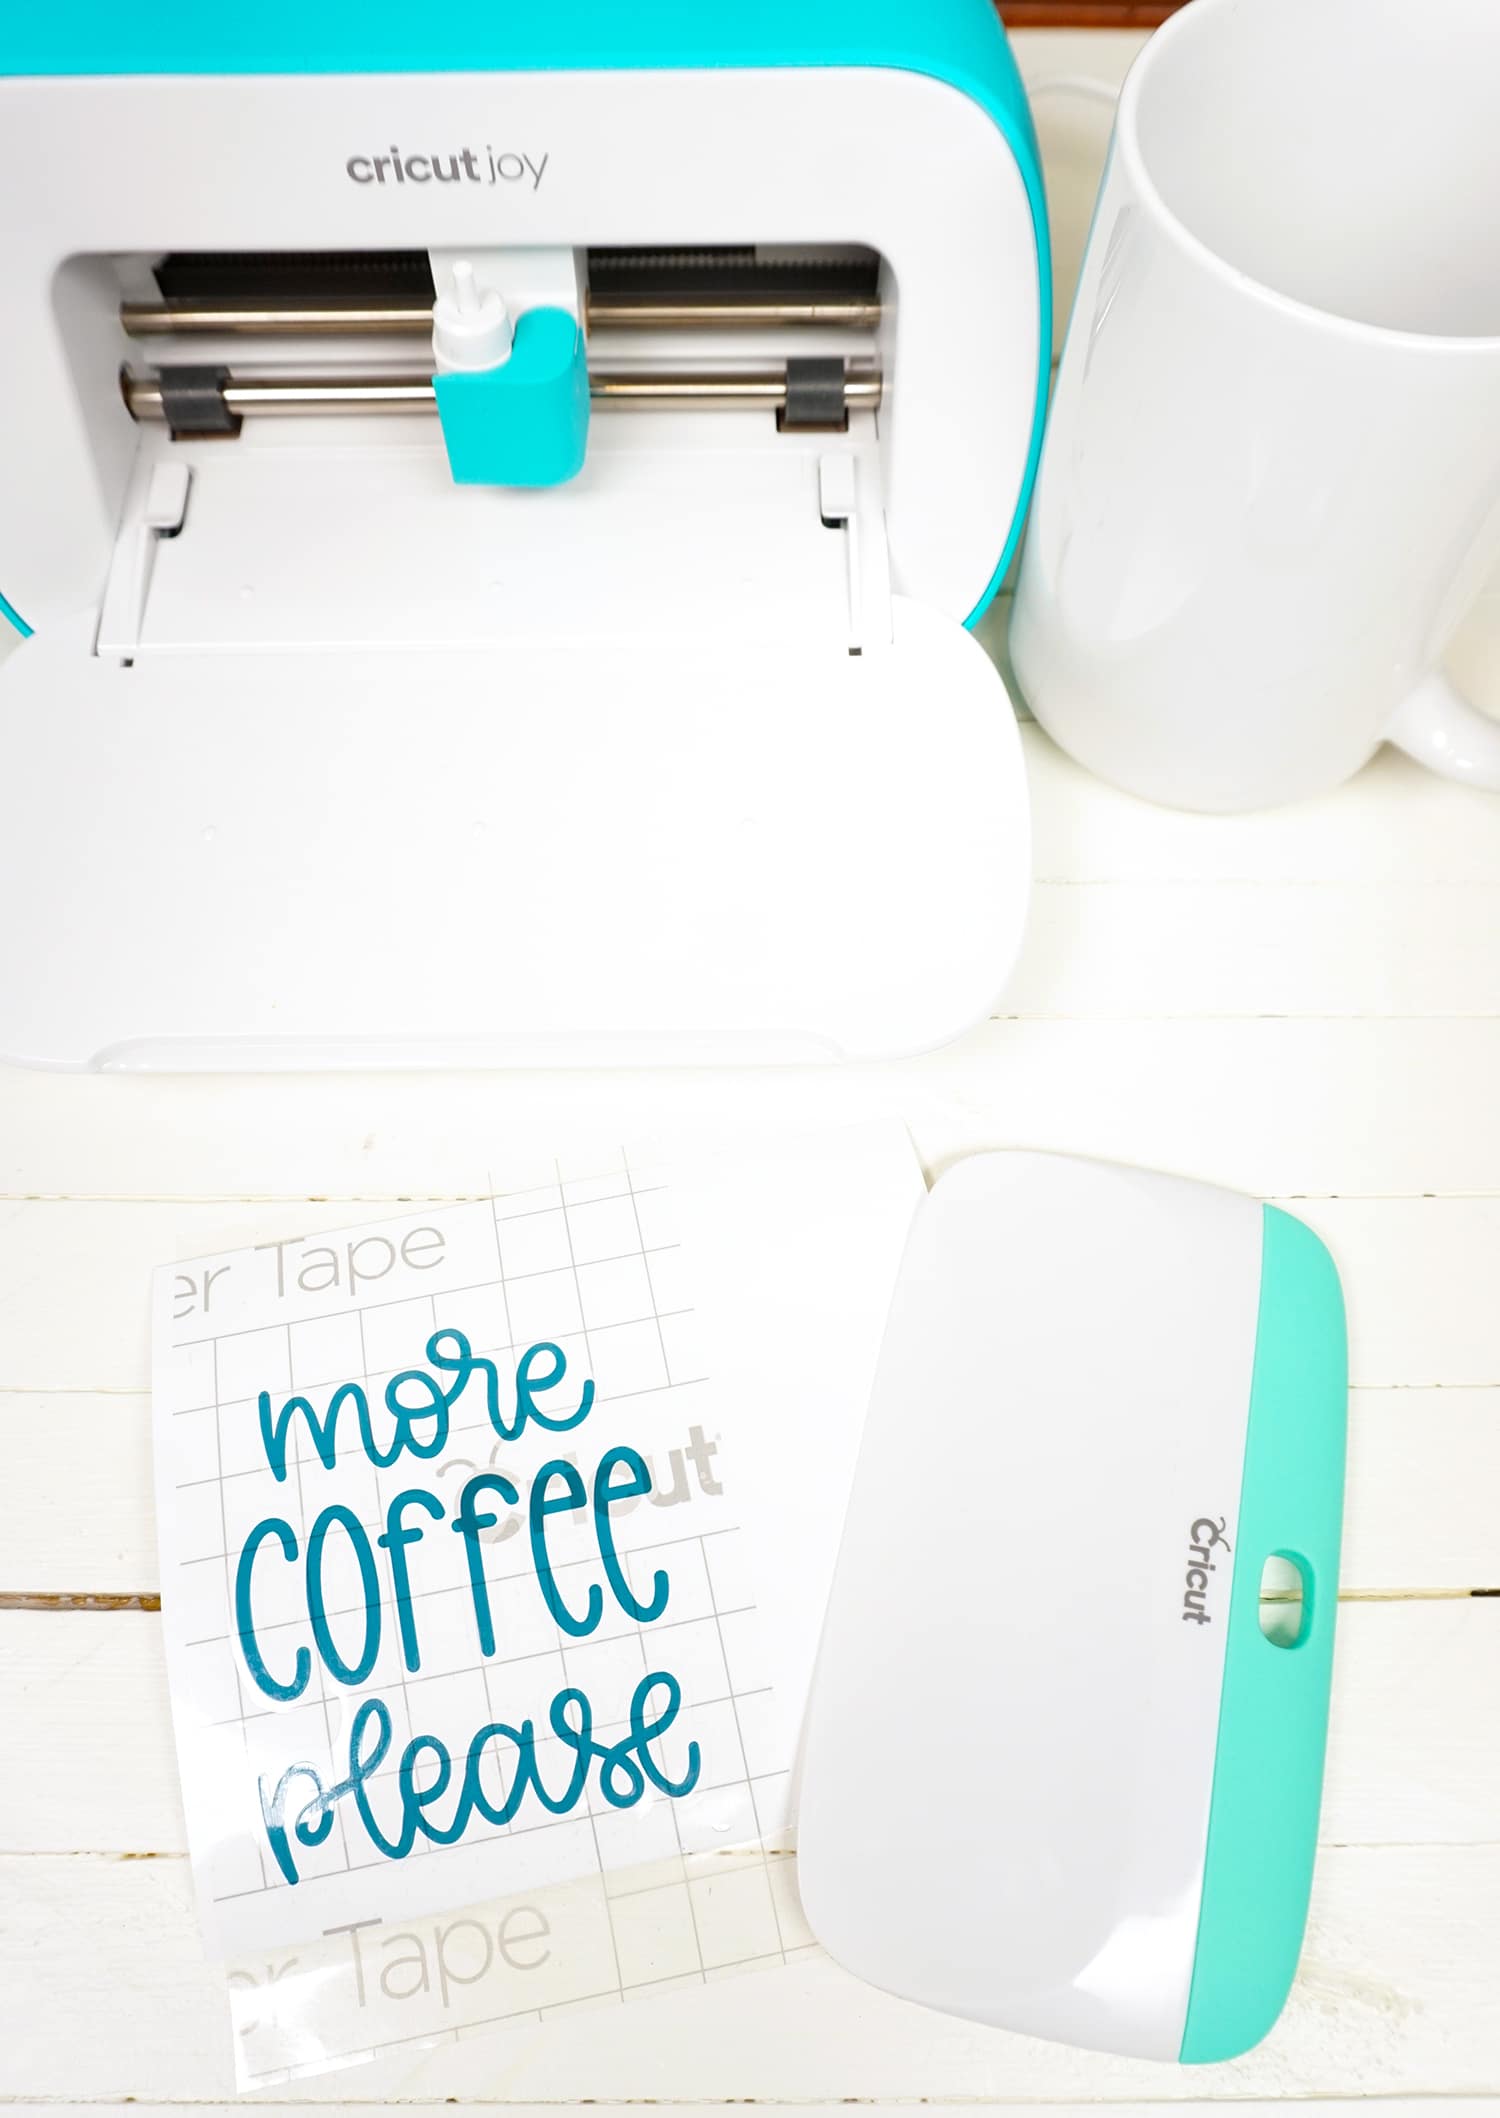 more coffee please vinyl design with transfer tape